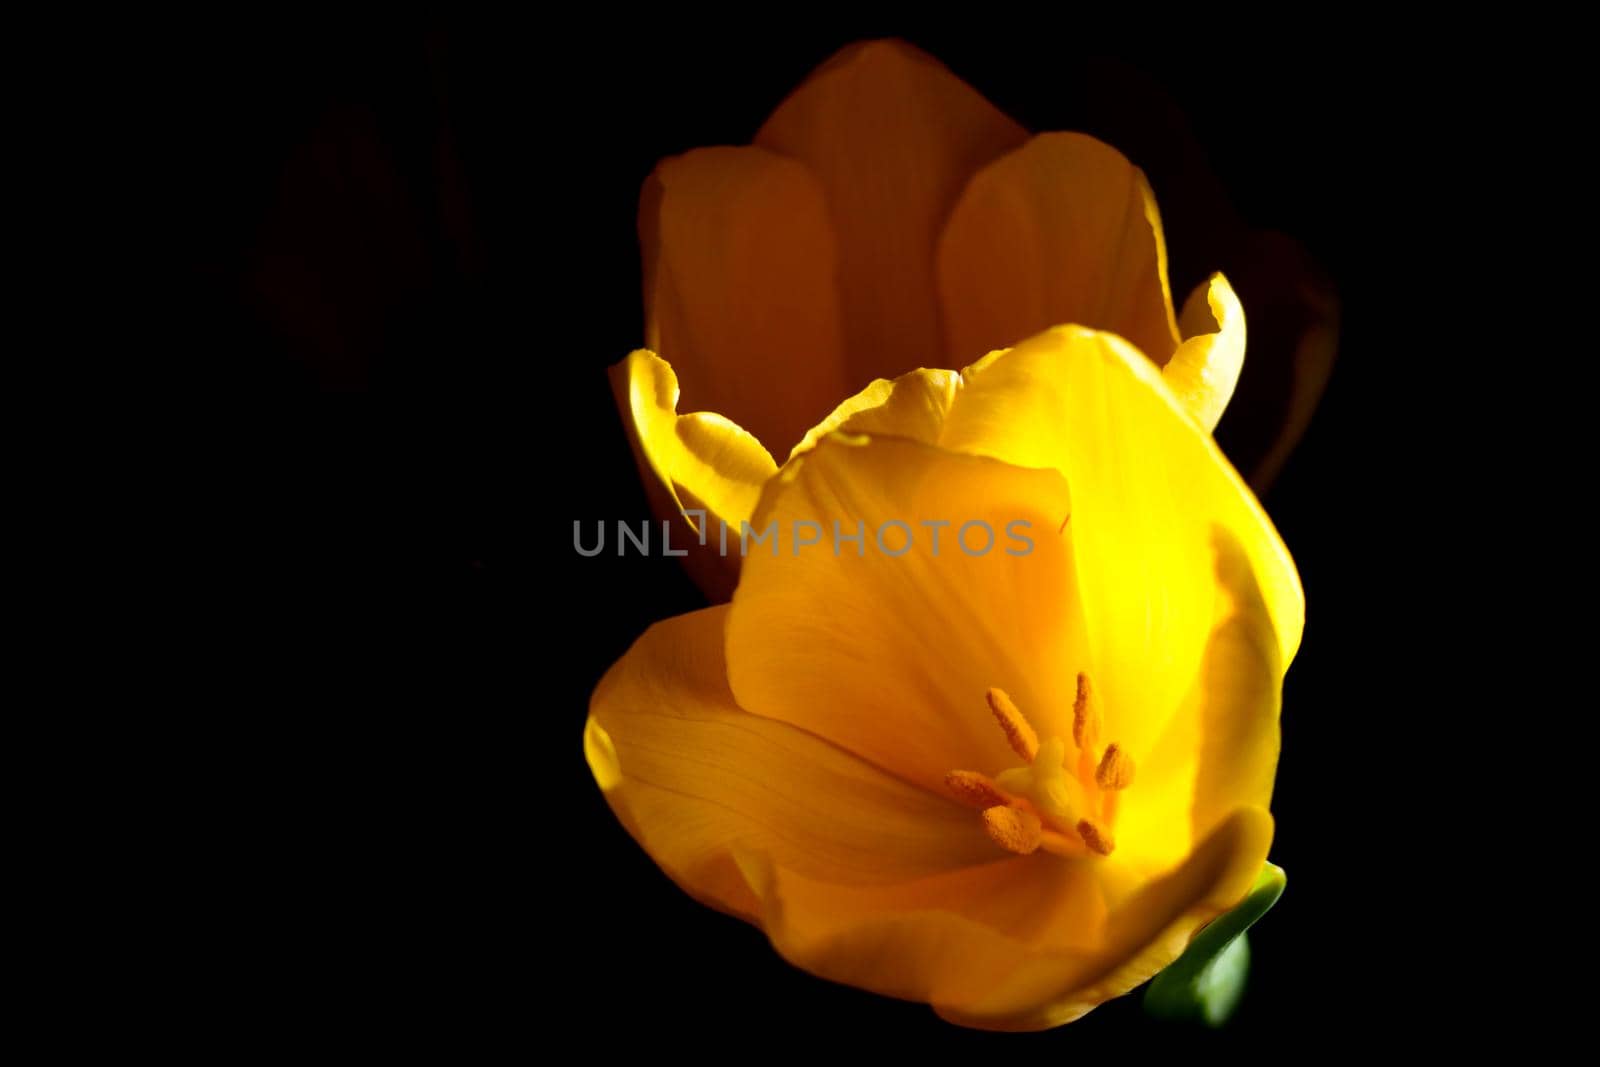 Beautiful yellow tulips on a black background. Flowers are blooming